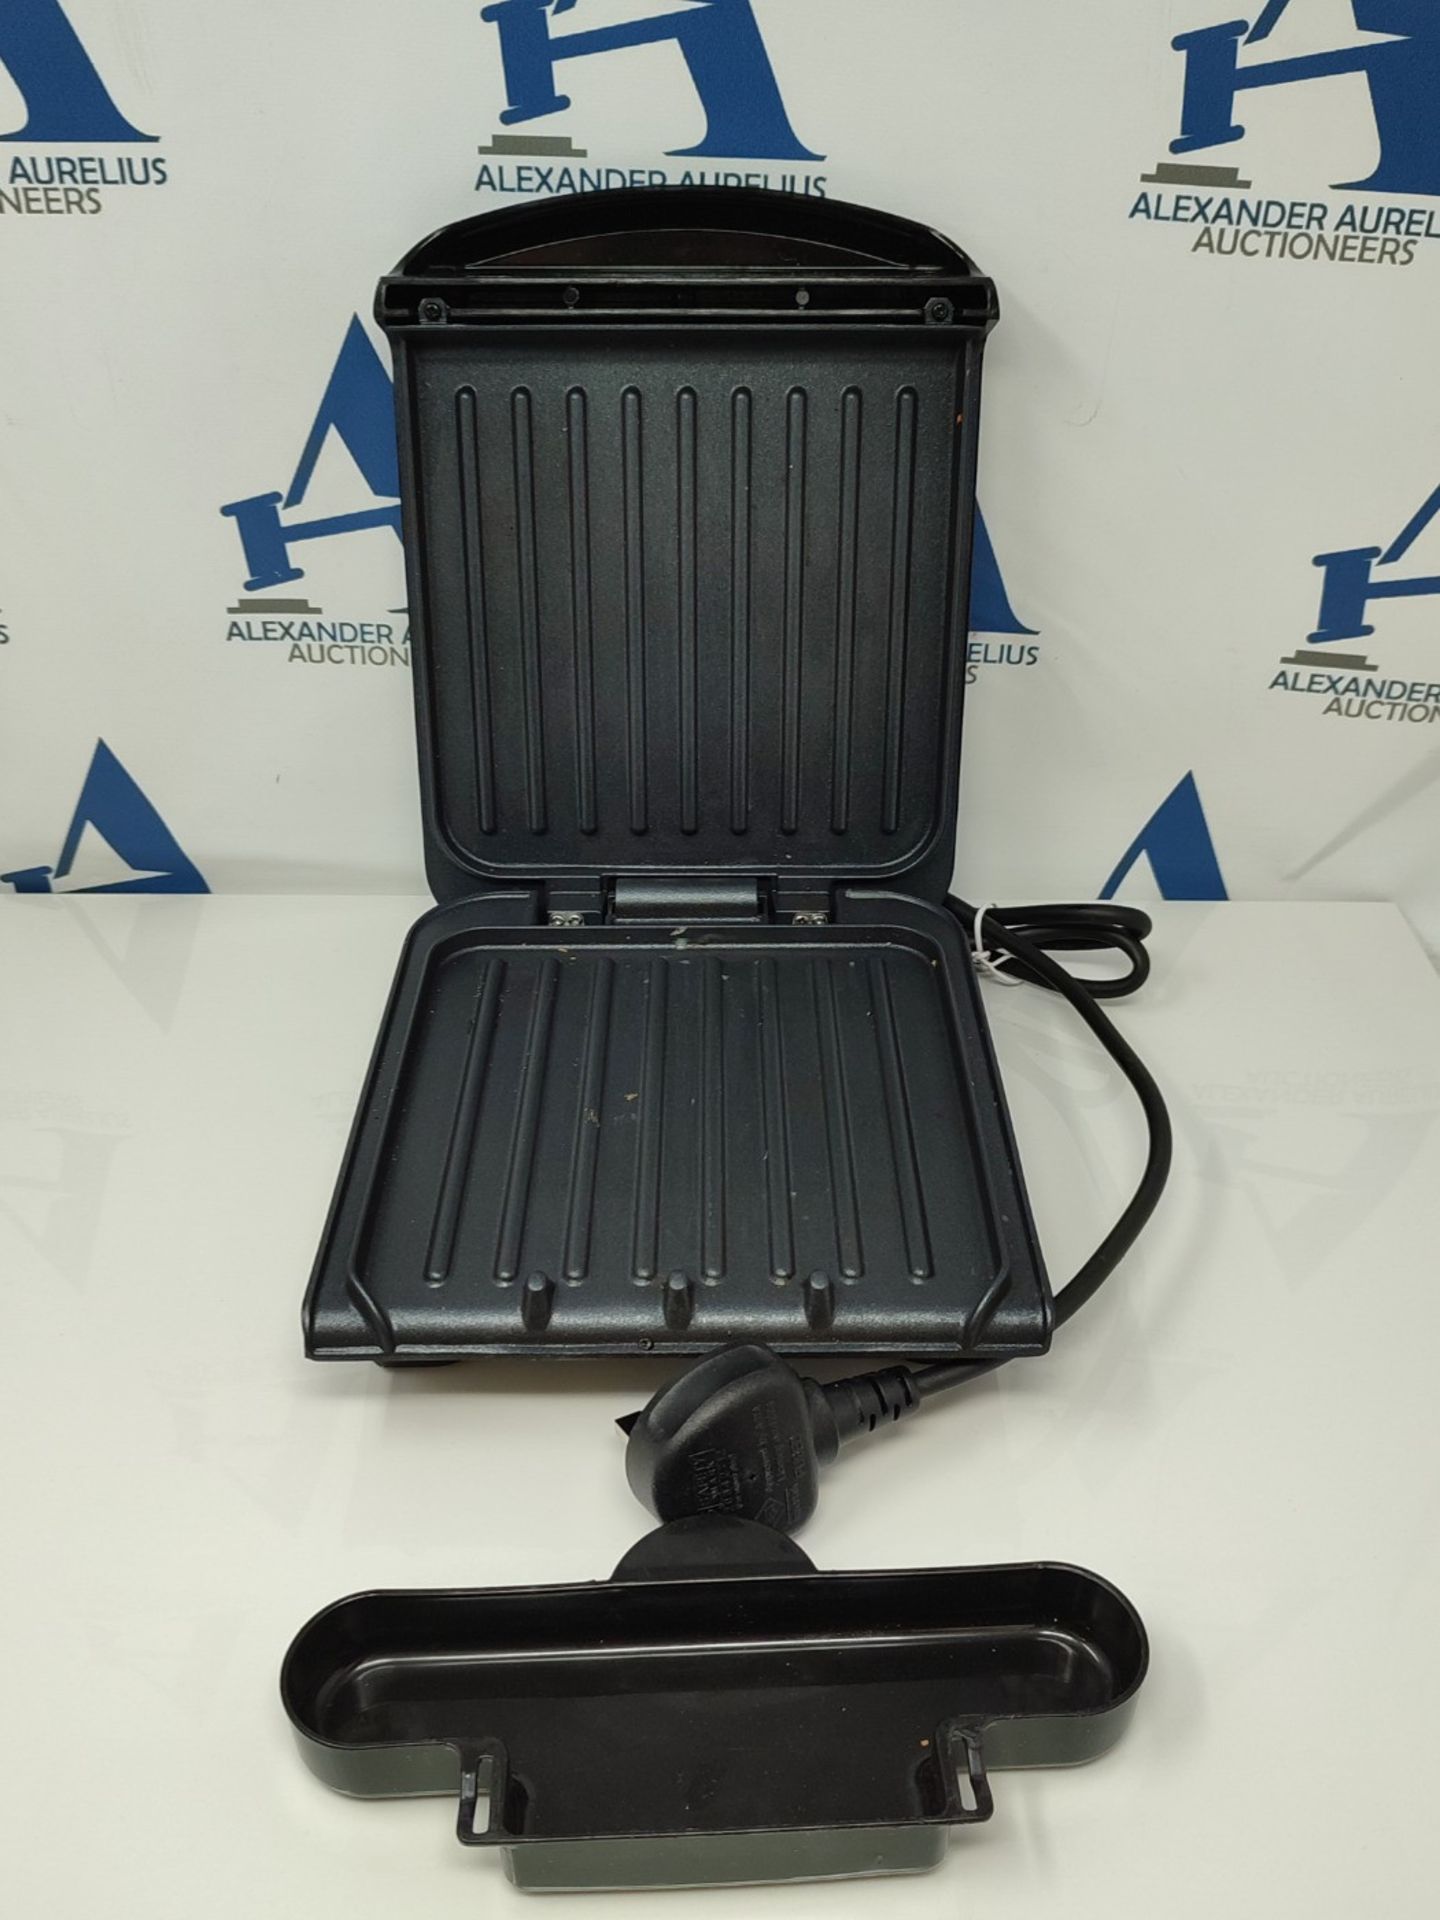 George Foreman 25800 Small Fit Grill - Versatile Griddle, Hot Plate and Toastie Machin - Image 3 of 3